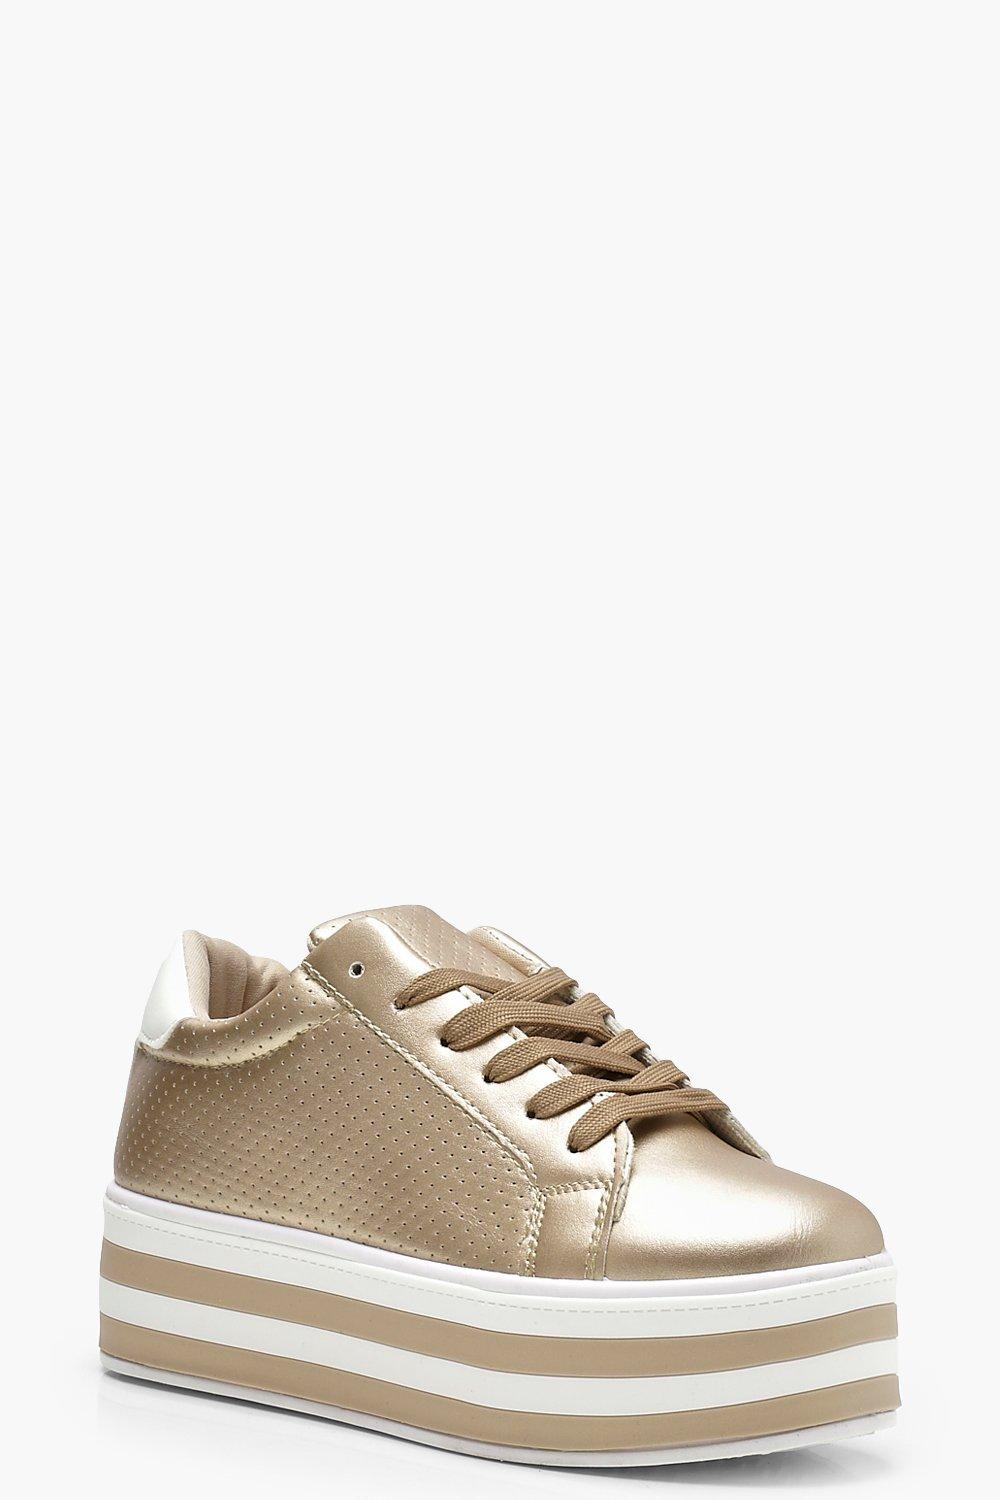 isabel marant silver sneakers